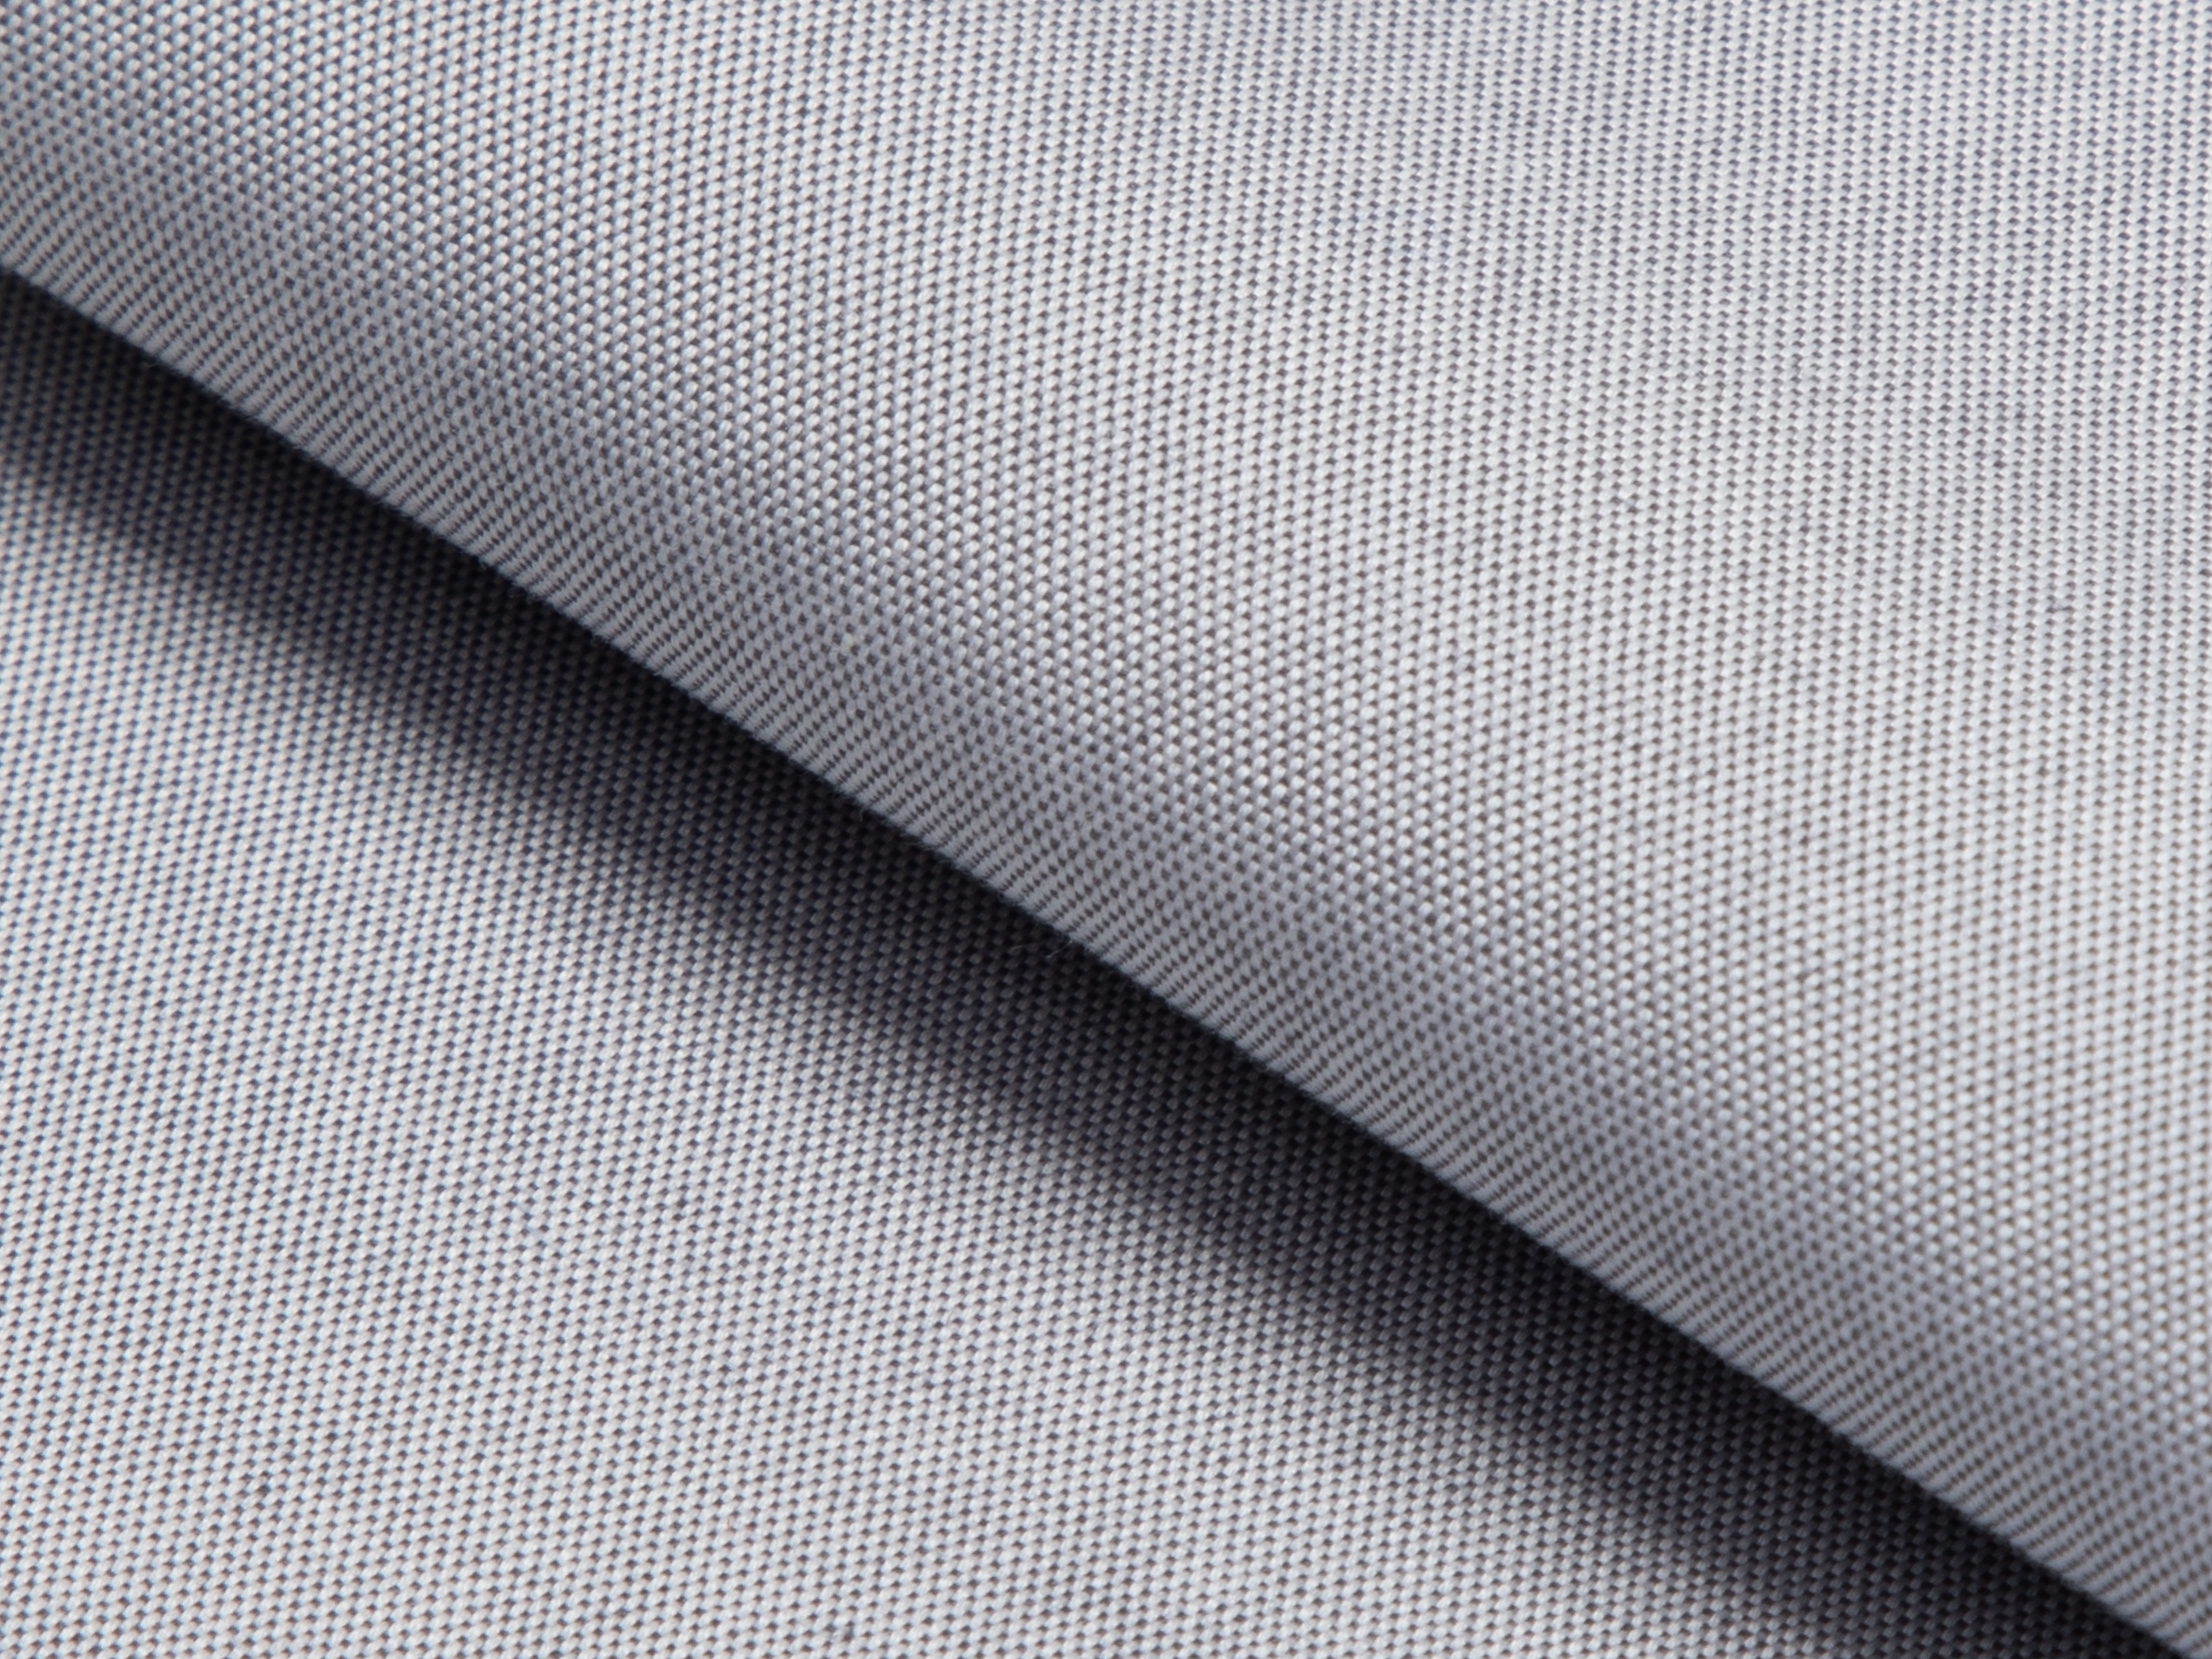 Buy tailor made shirts online - PINPOINT LUXURY - Pinpoint Silver Grey